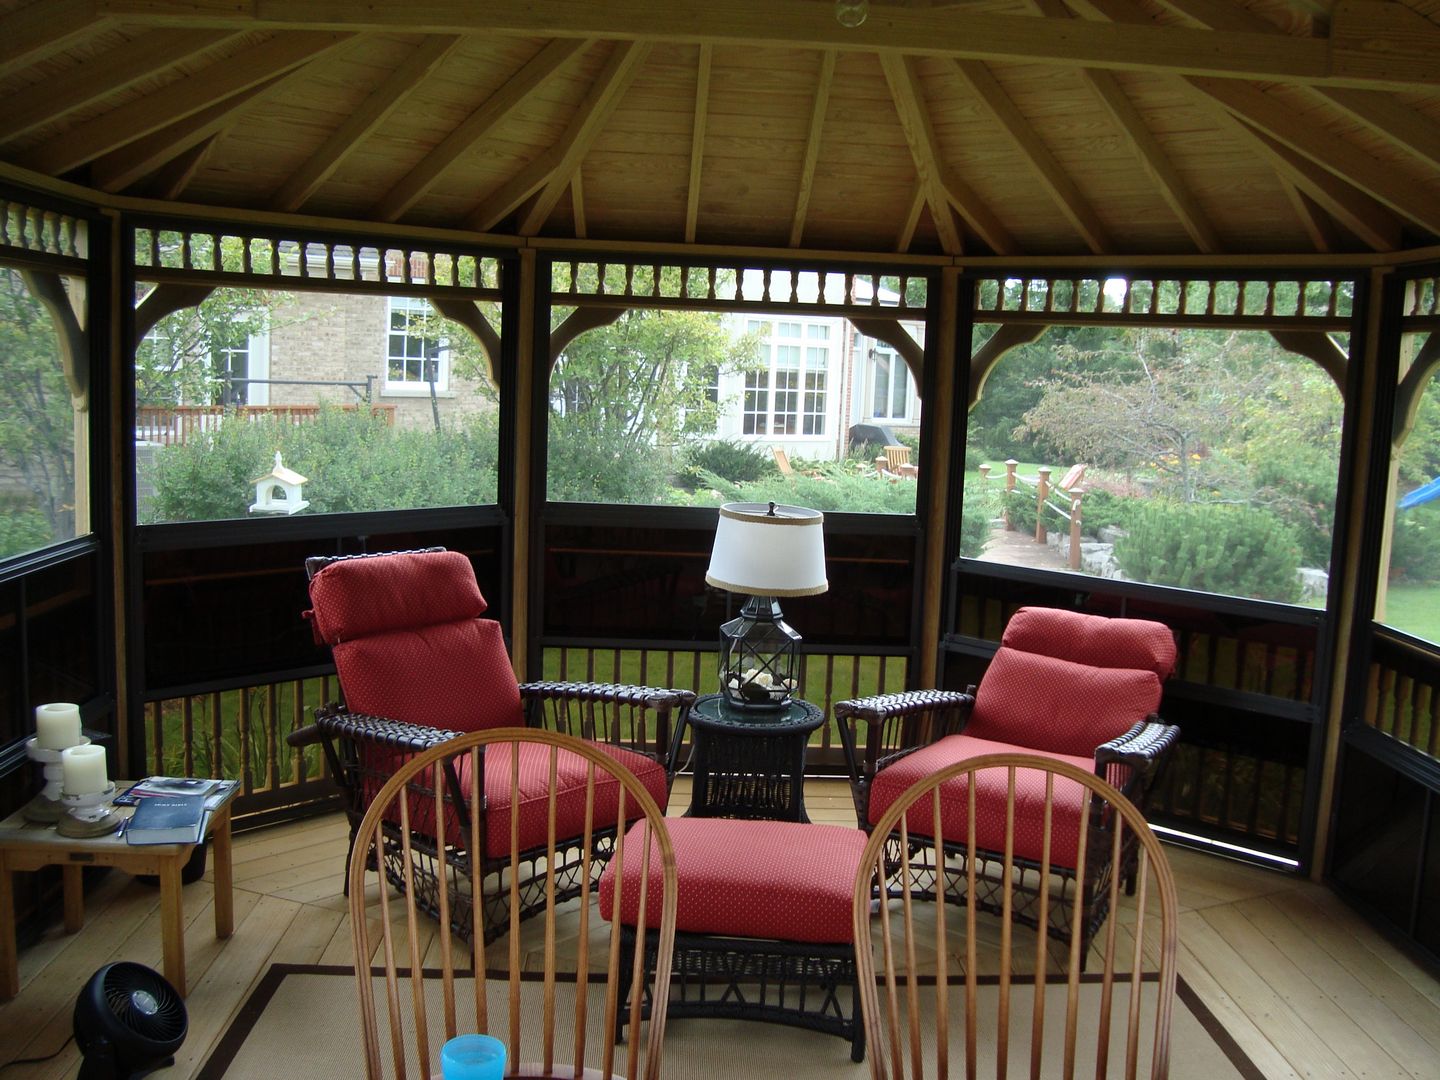 wooden 14 by 20 foot oval gazebo interior